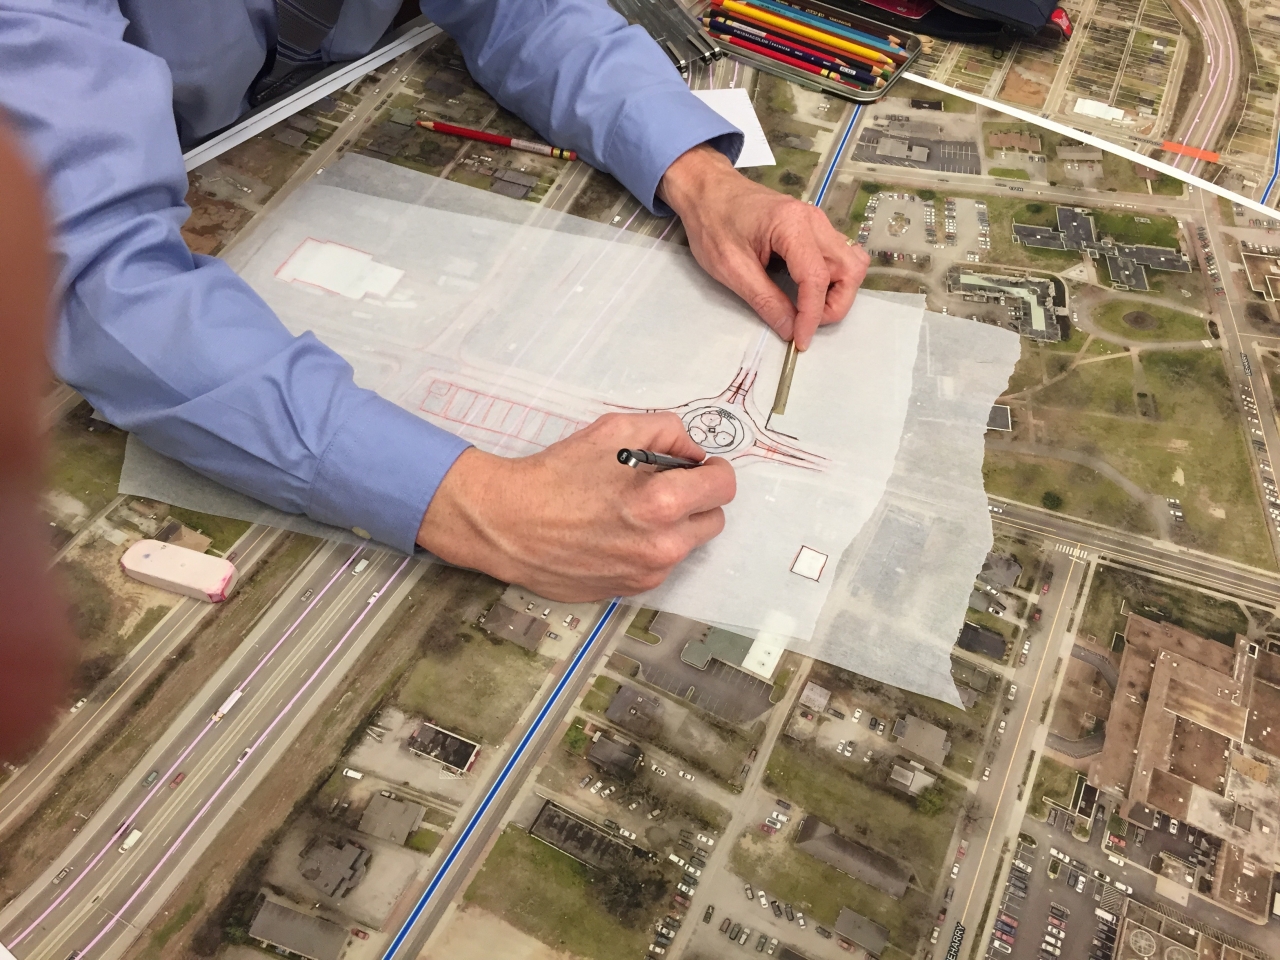 A man drafting a redesign of streets in Nashville